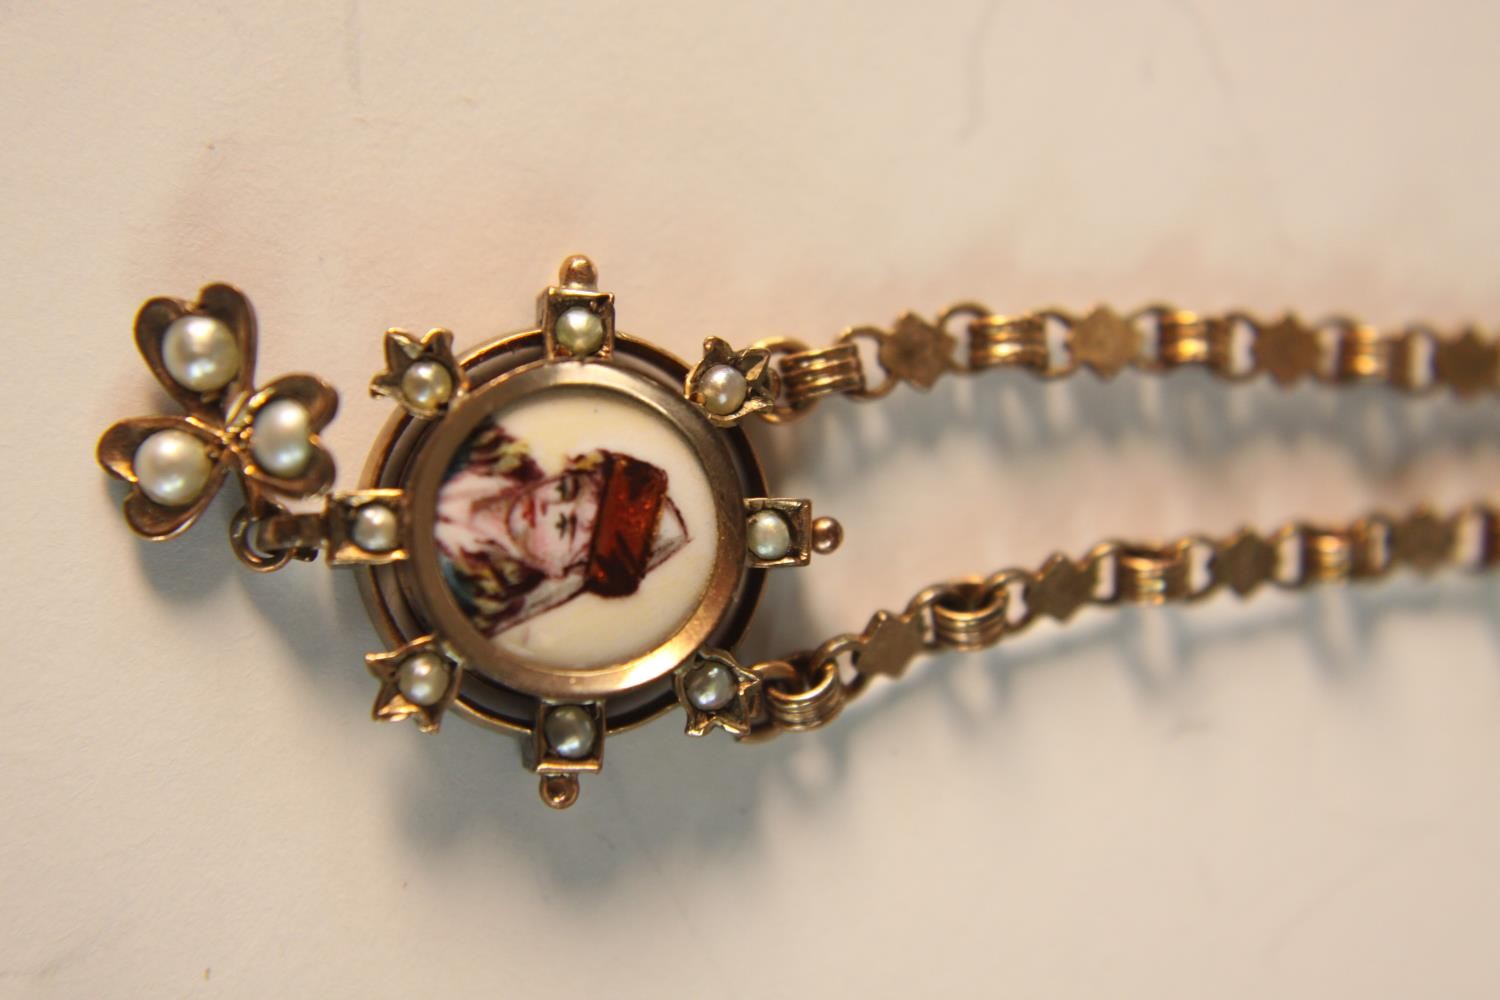 A 19th century rose gold plated watch fob, the end pendant a hand painted portrait on enamel of a - Image 4 of 7